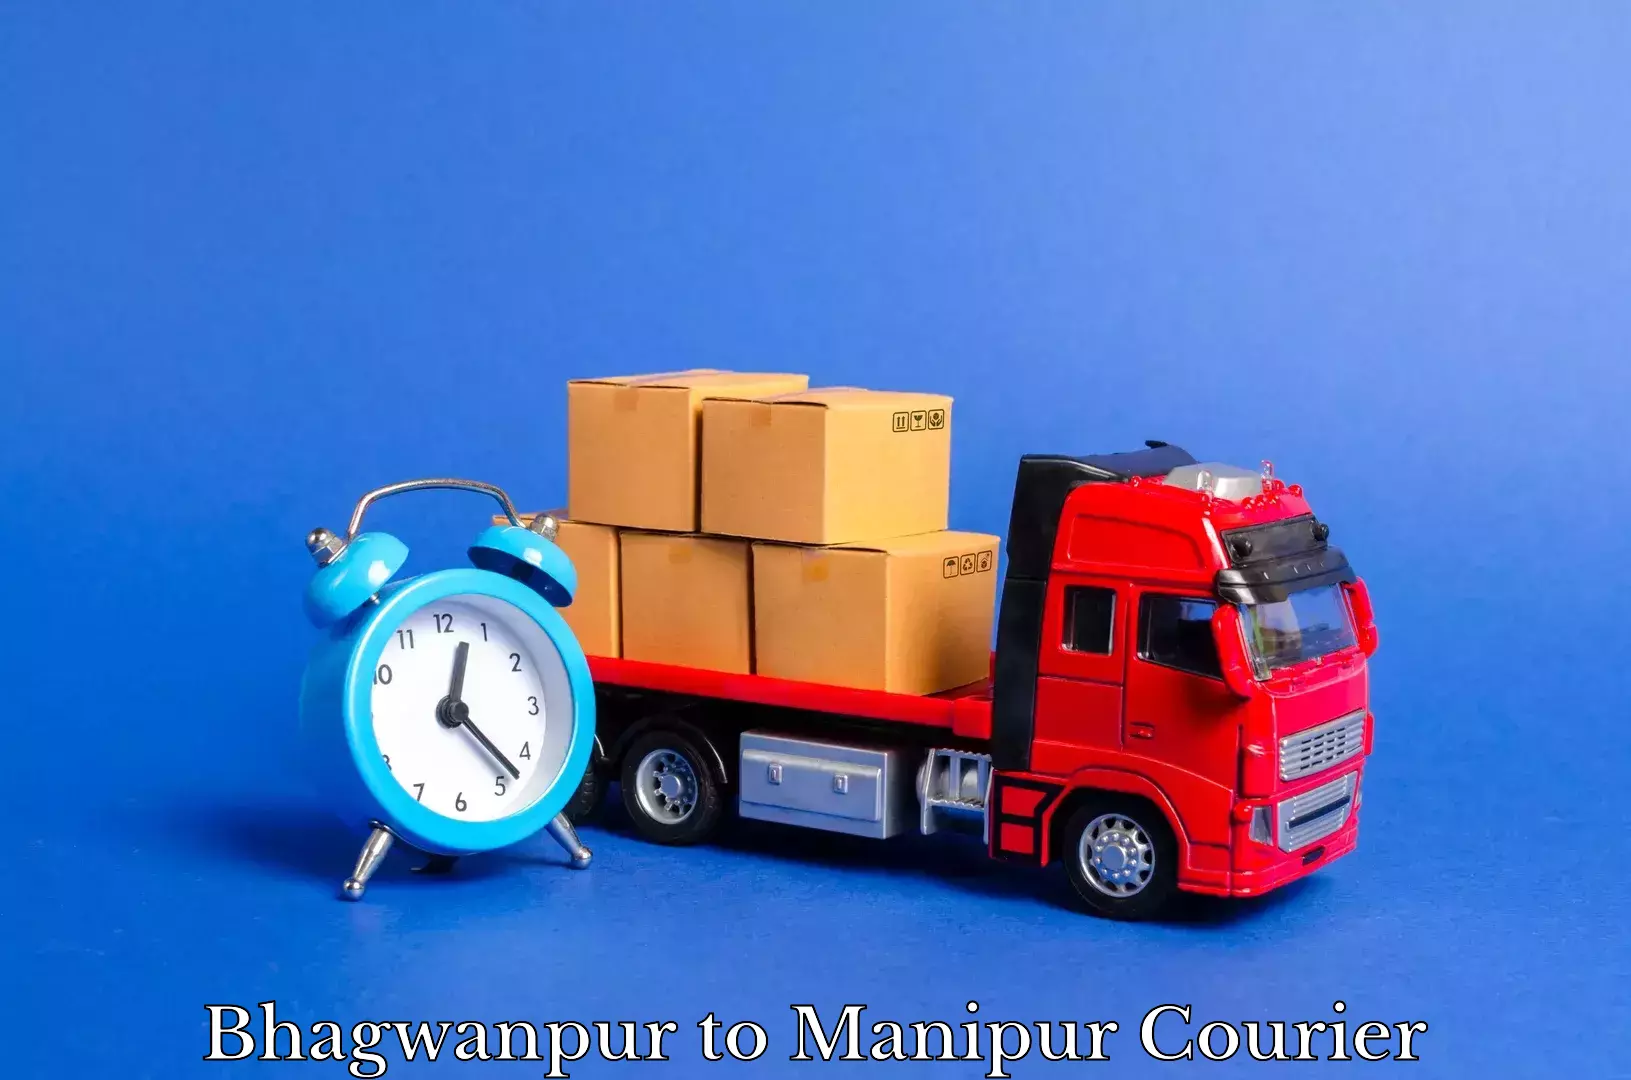 Furniture delivery service Bhagwanpur to Manipur